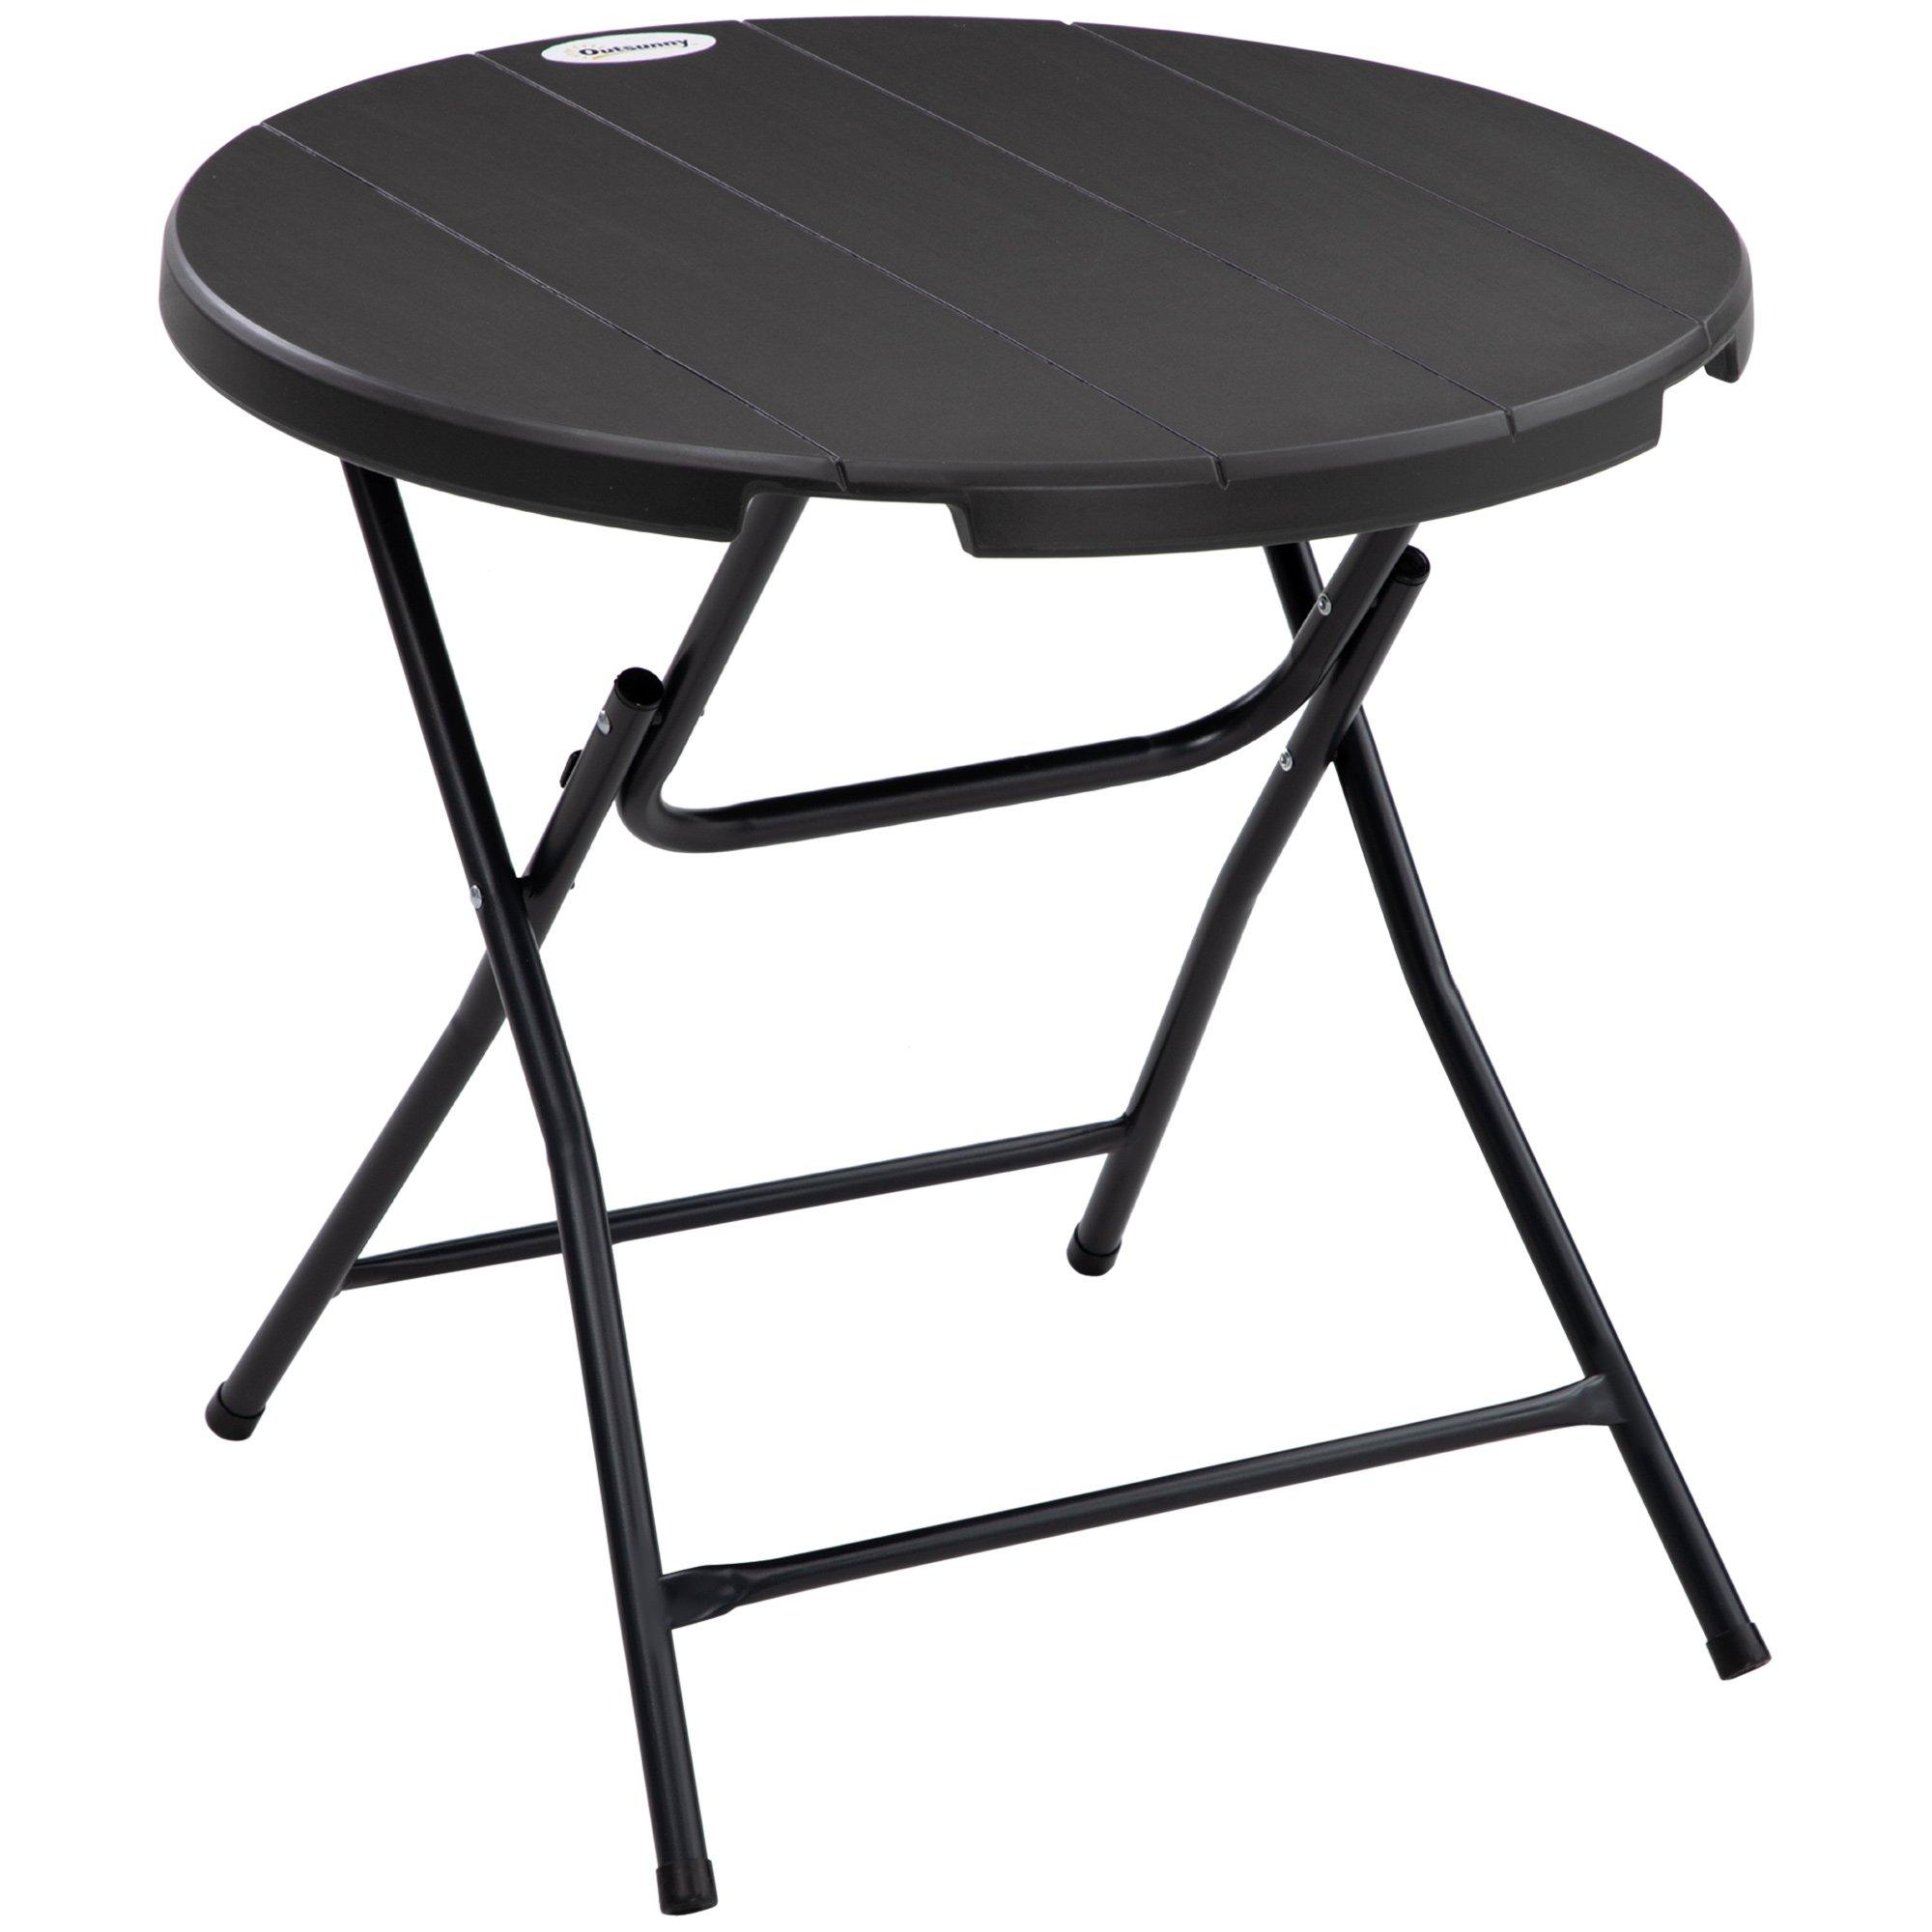 Round Garden Dining Table for 4, Foldable Outdoor Table for Garden